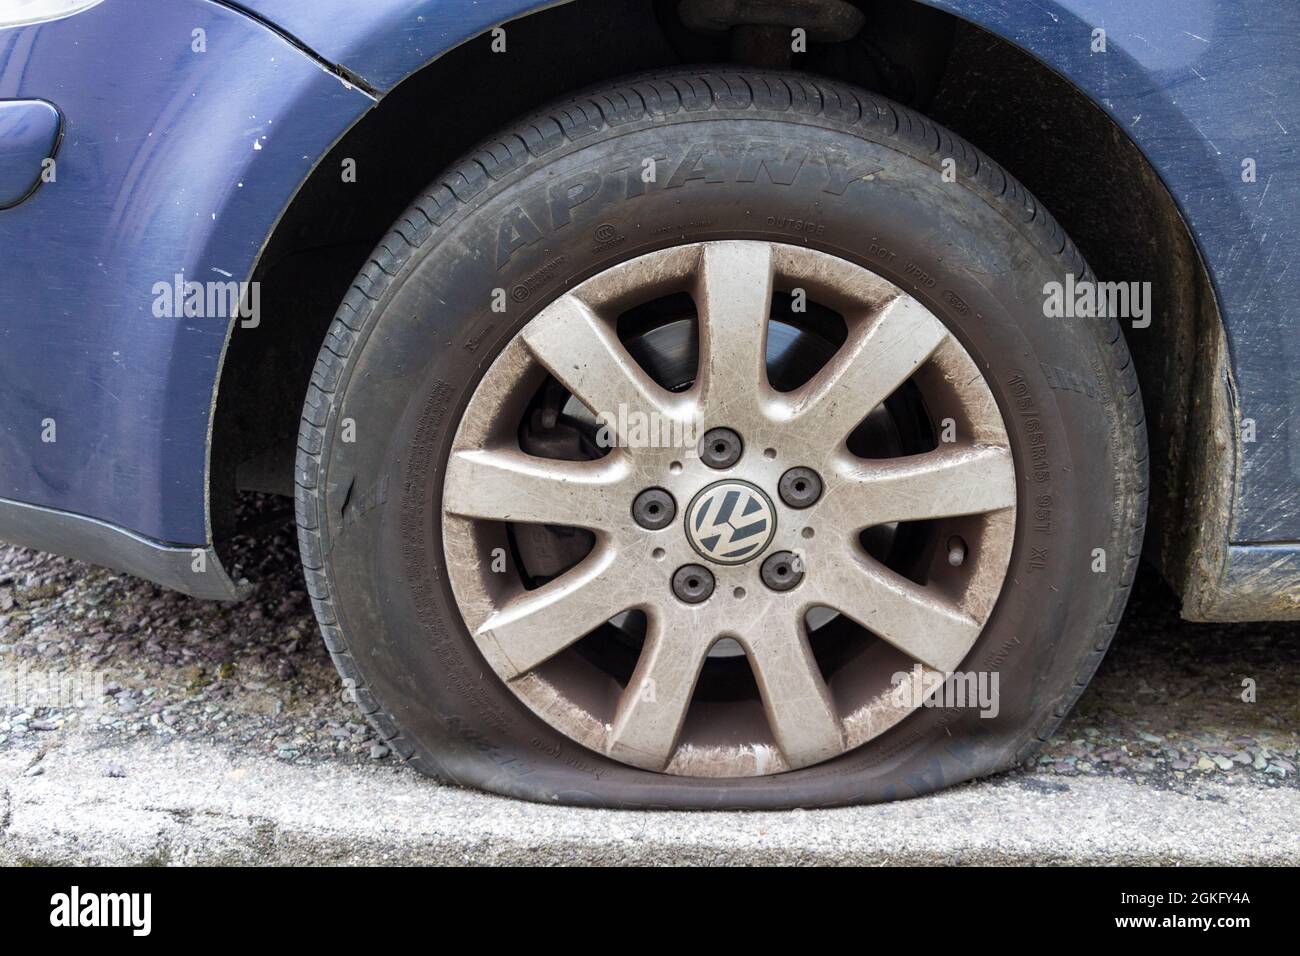 Car Tyre with sidewall or side wall slashed Stock Photo